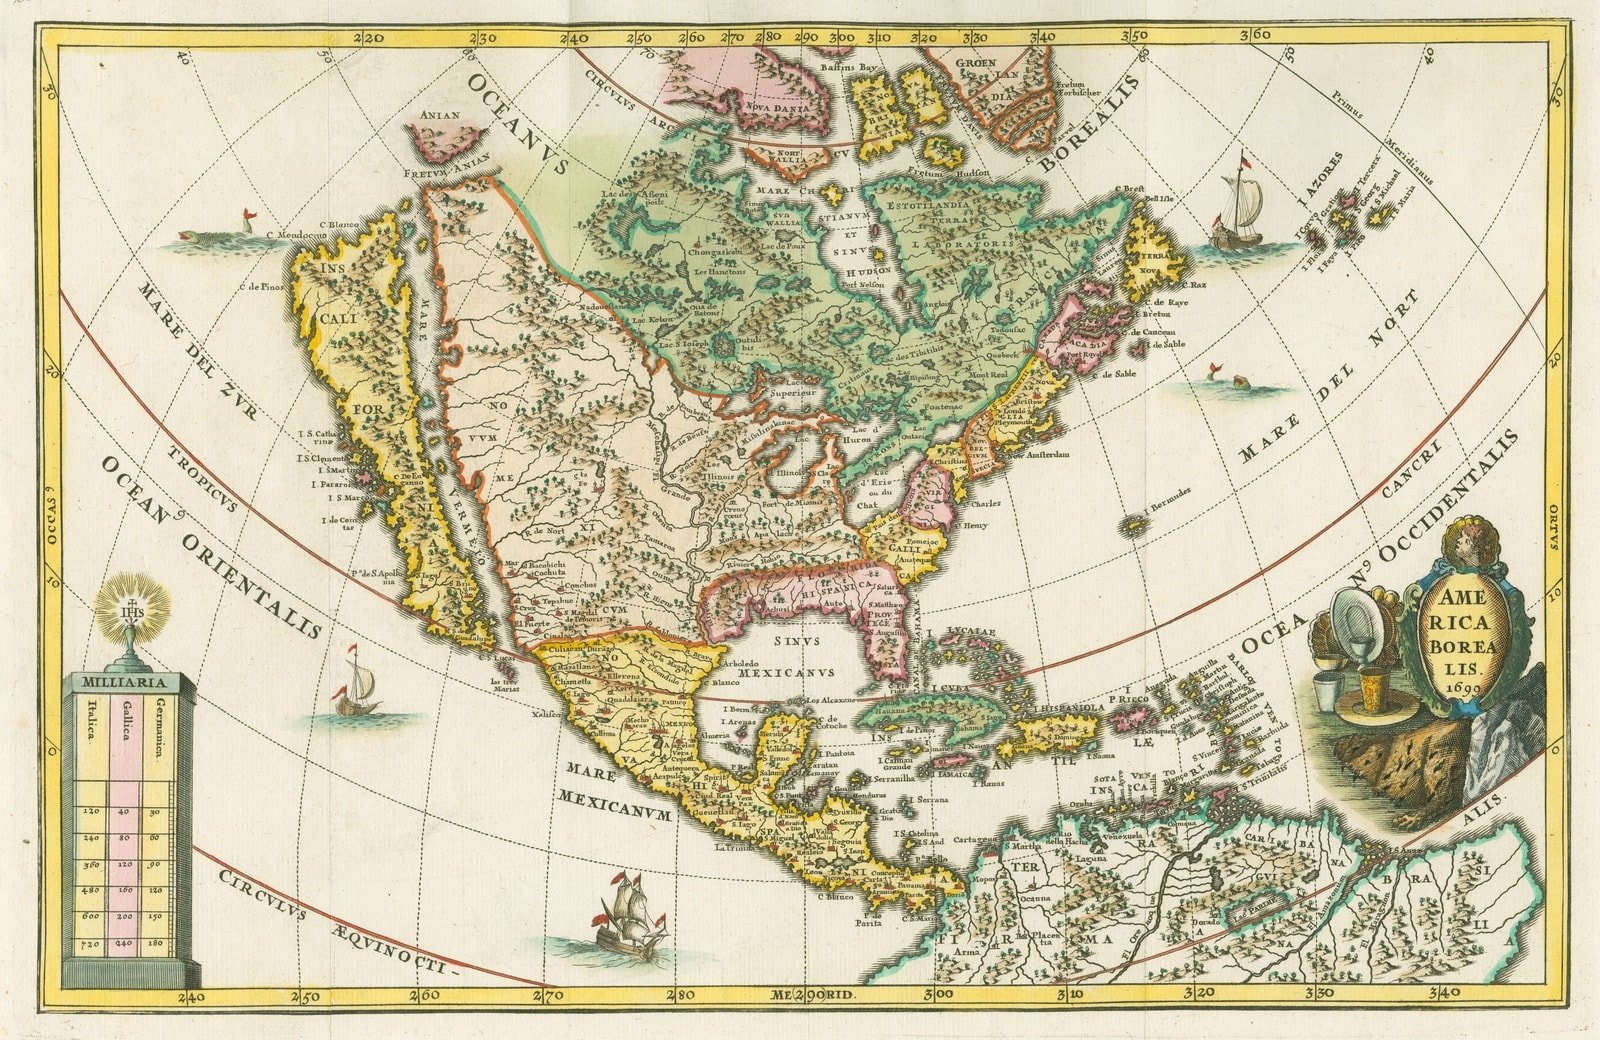 18th century map of the Americas